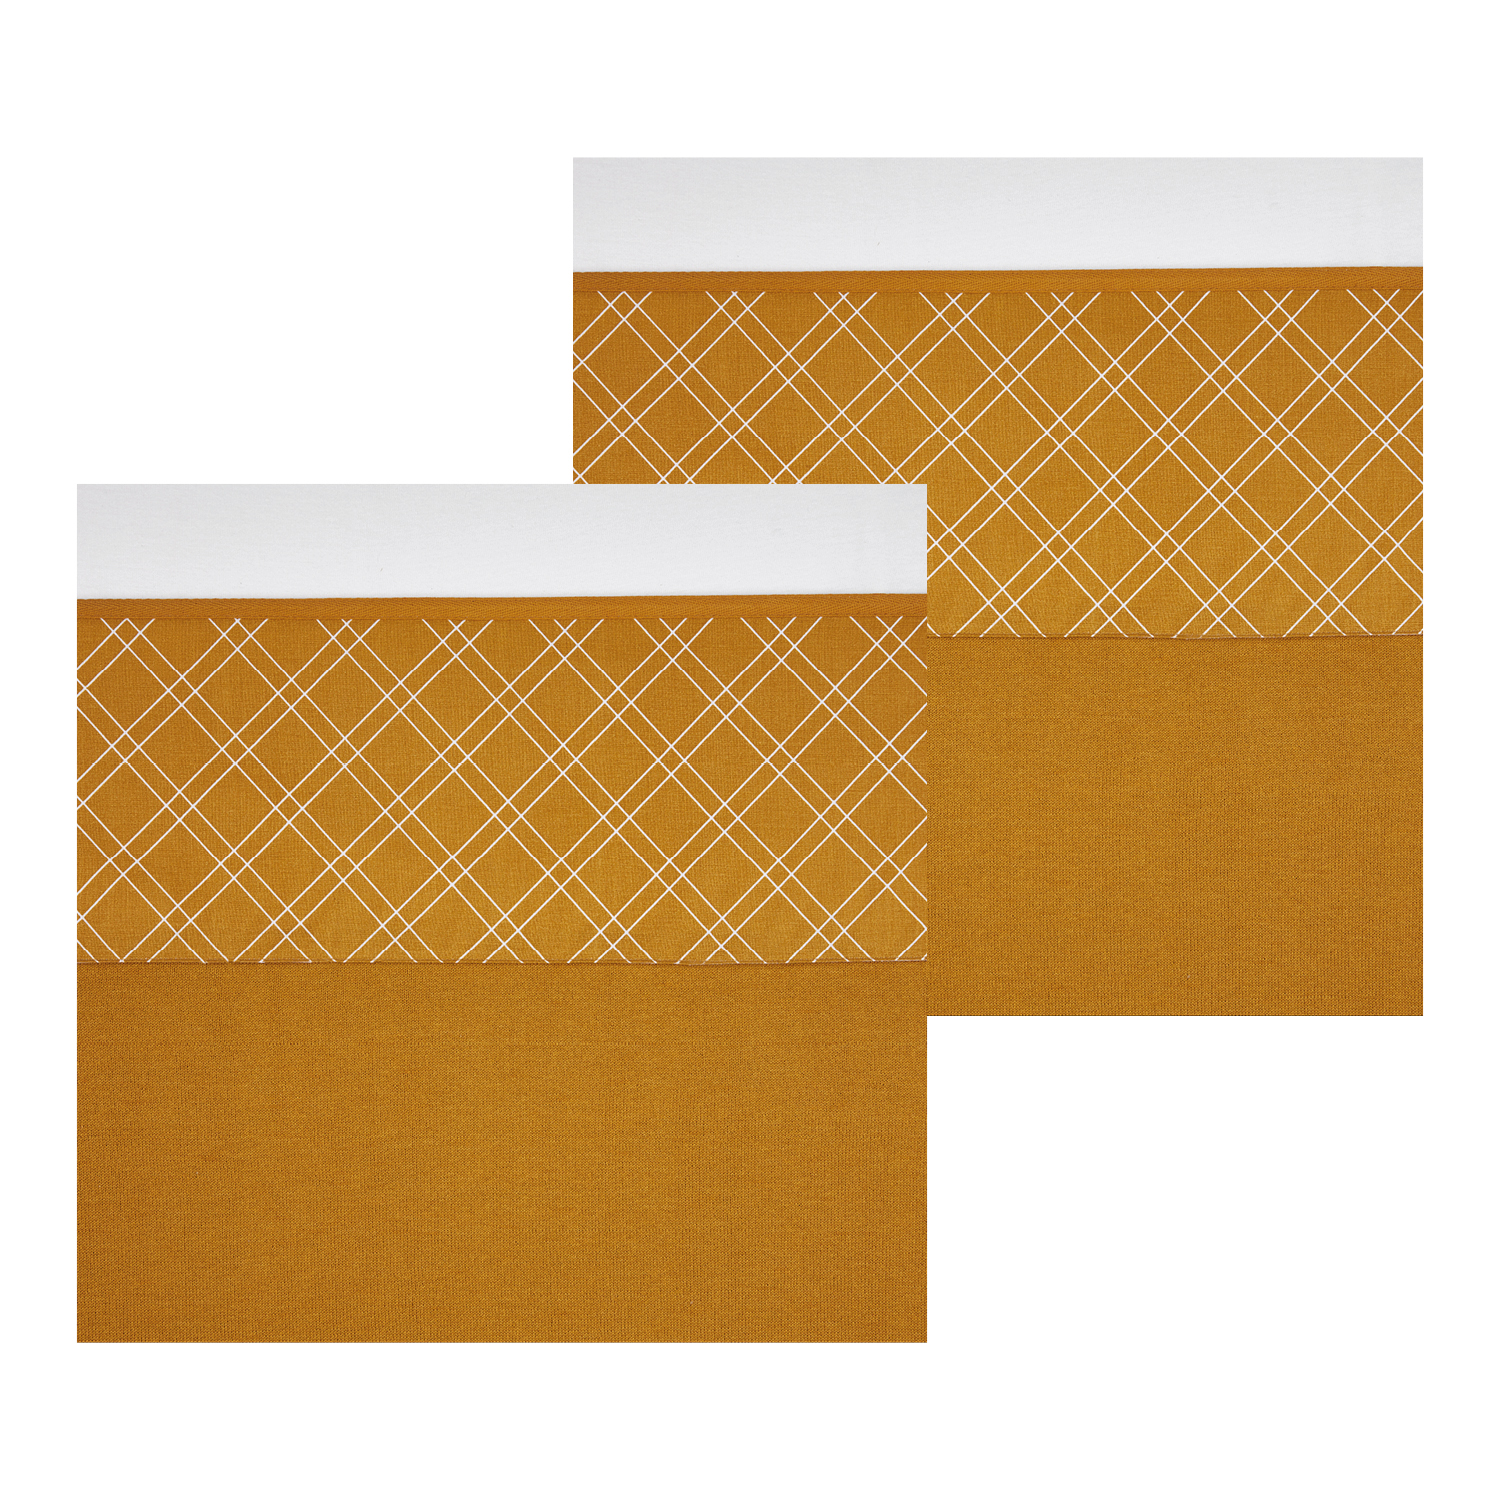 Cot bed sheet 2-pack Double Diamond - honey gold - 100x150cm